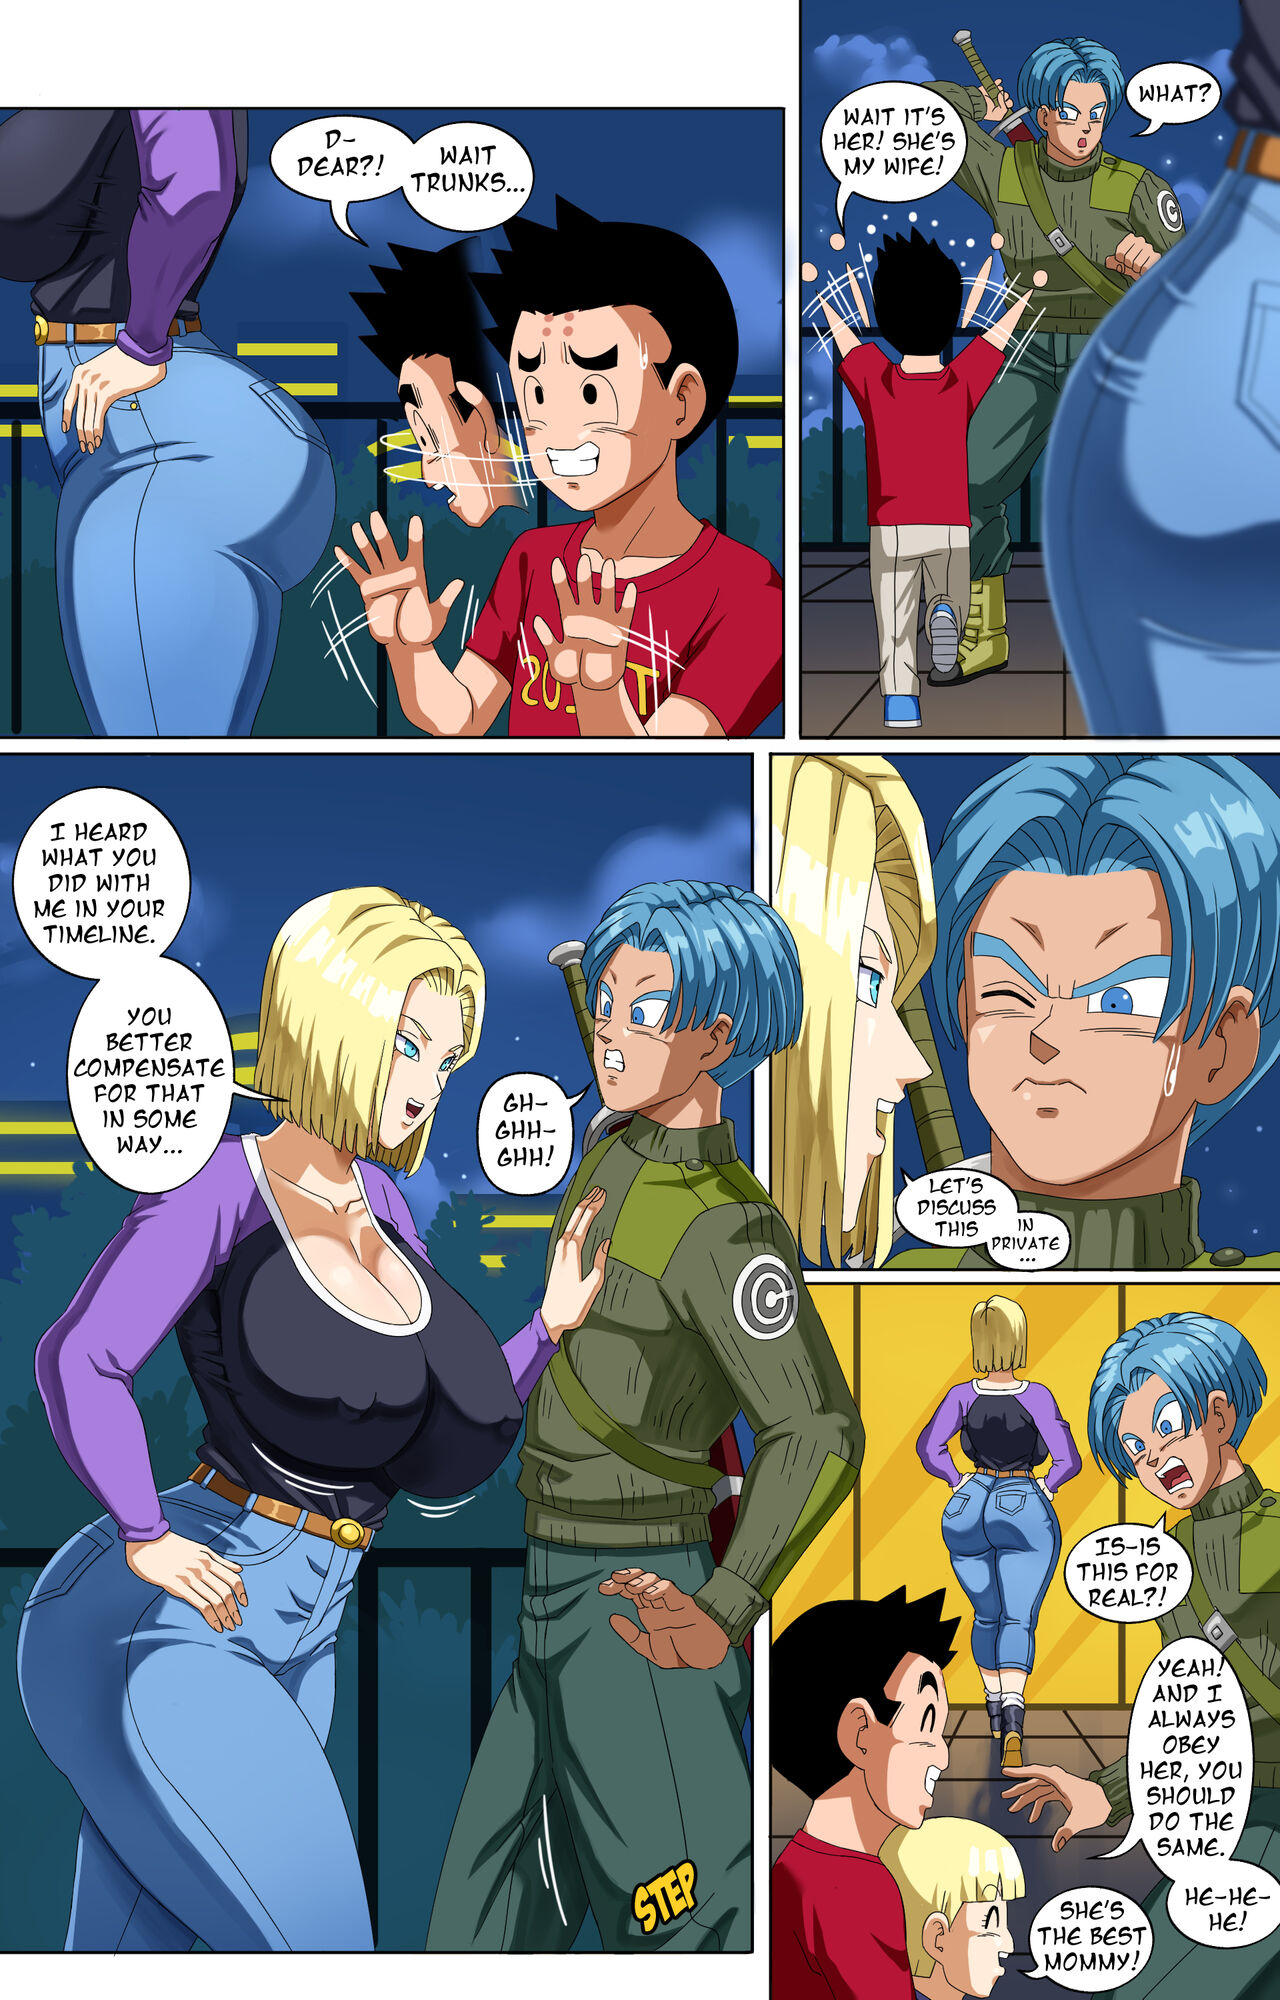 Trunks Android 18 Porn Comic - Android 18 And Trunks â€“ Pink Pawg - KingComiX.com